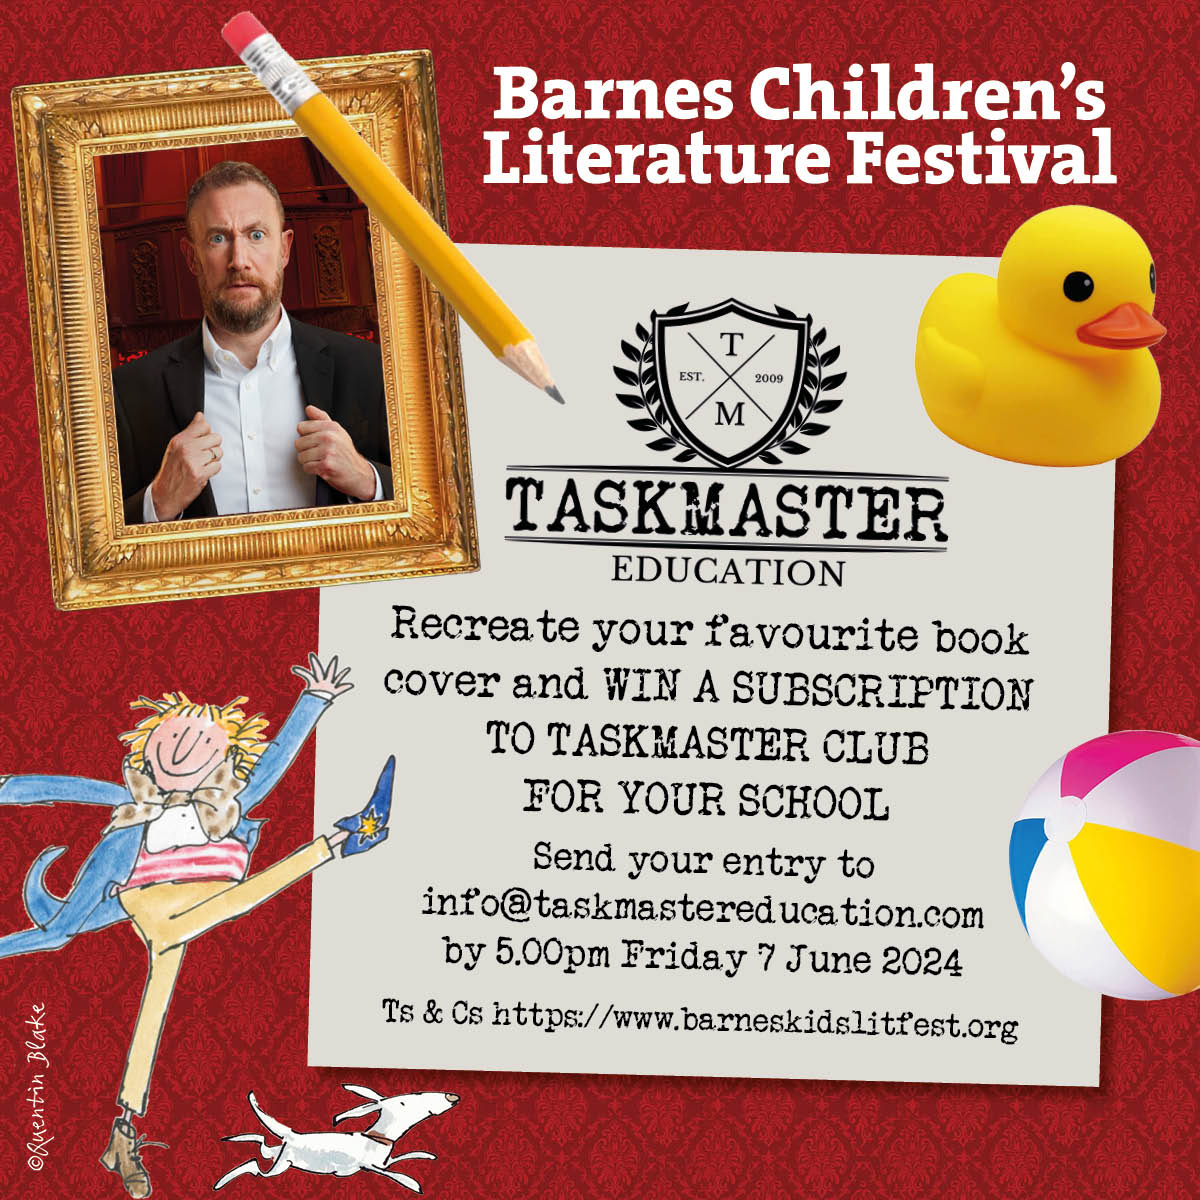 TEACHERS! SCHOOLS! PARENTS! EVERYONE! @AlexHorne wants YOU to recreate your favourite book cover and you could #WIN a subscription to #TaskmasterClub for your school! Like RT & tag a pal to be in with a chance of winning a gigantic box of books too! Your time starts NOW!